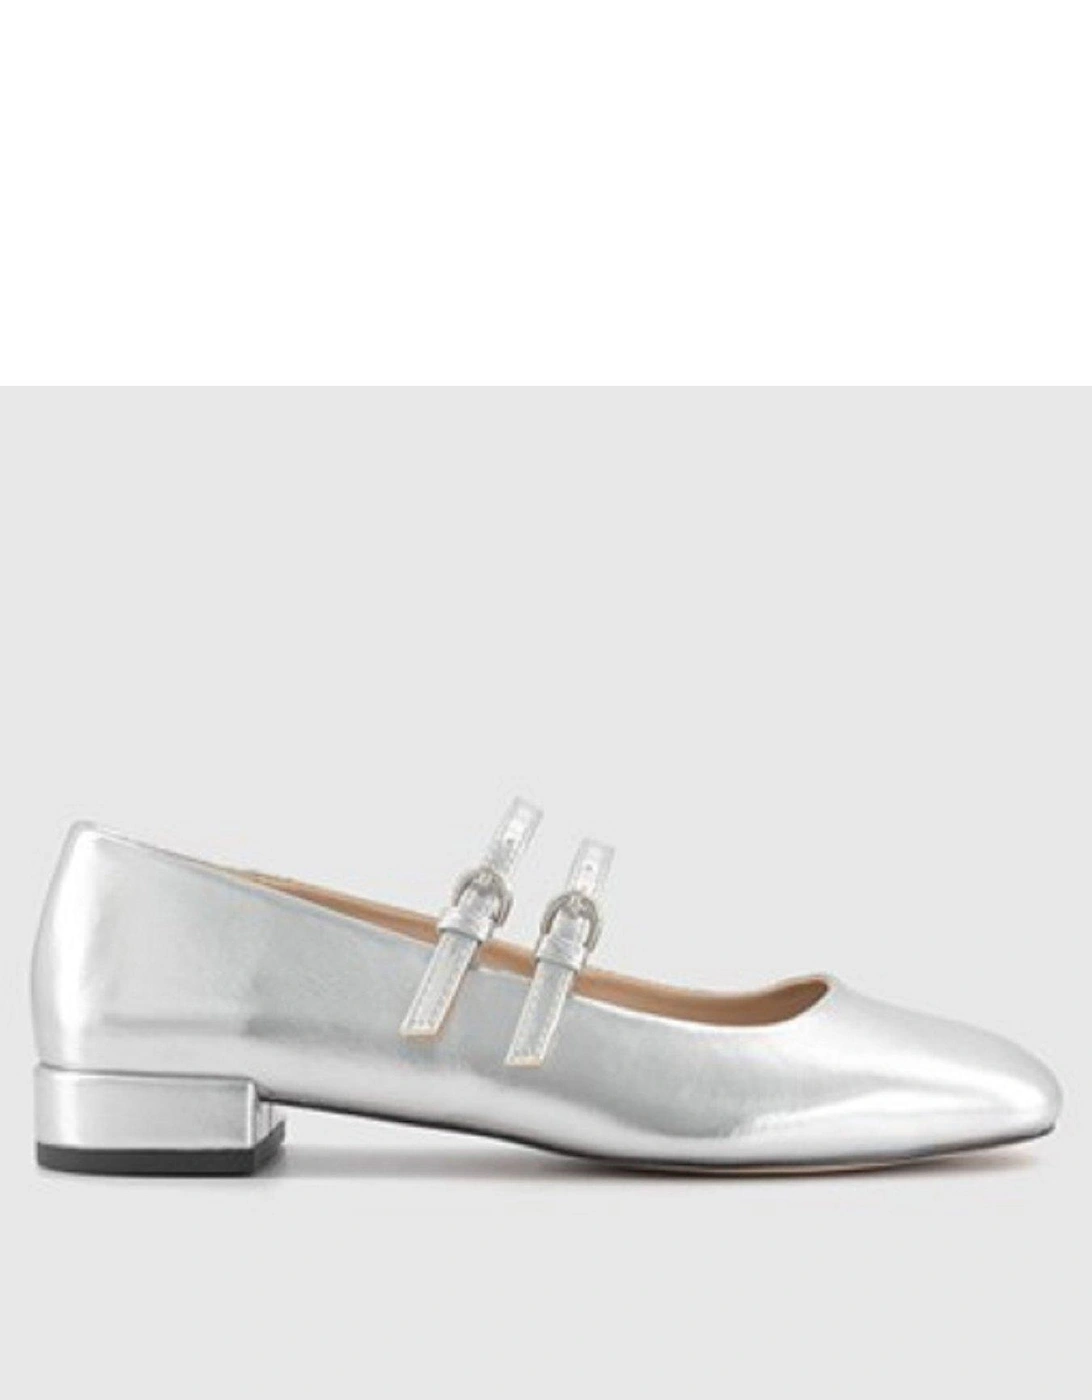 Frenchkiss Two Strap Mary Jane Flat Shoe - Silver, 5 of 4